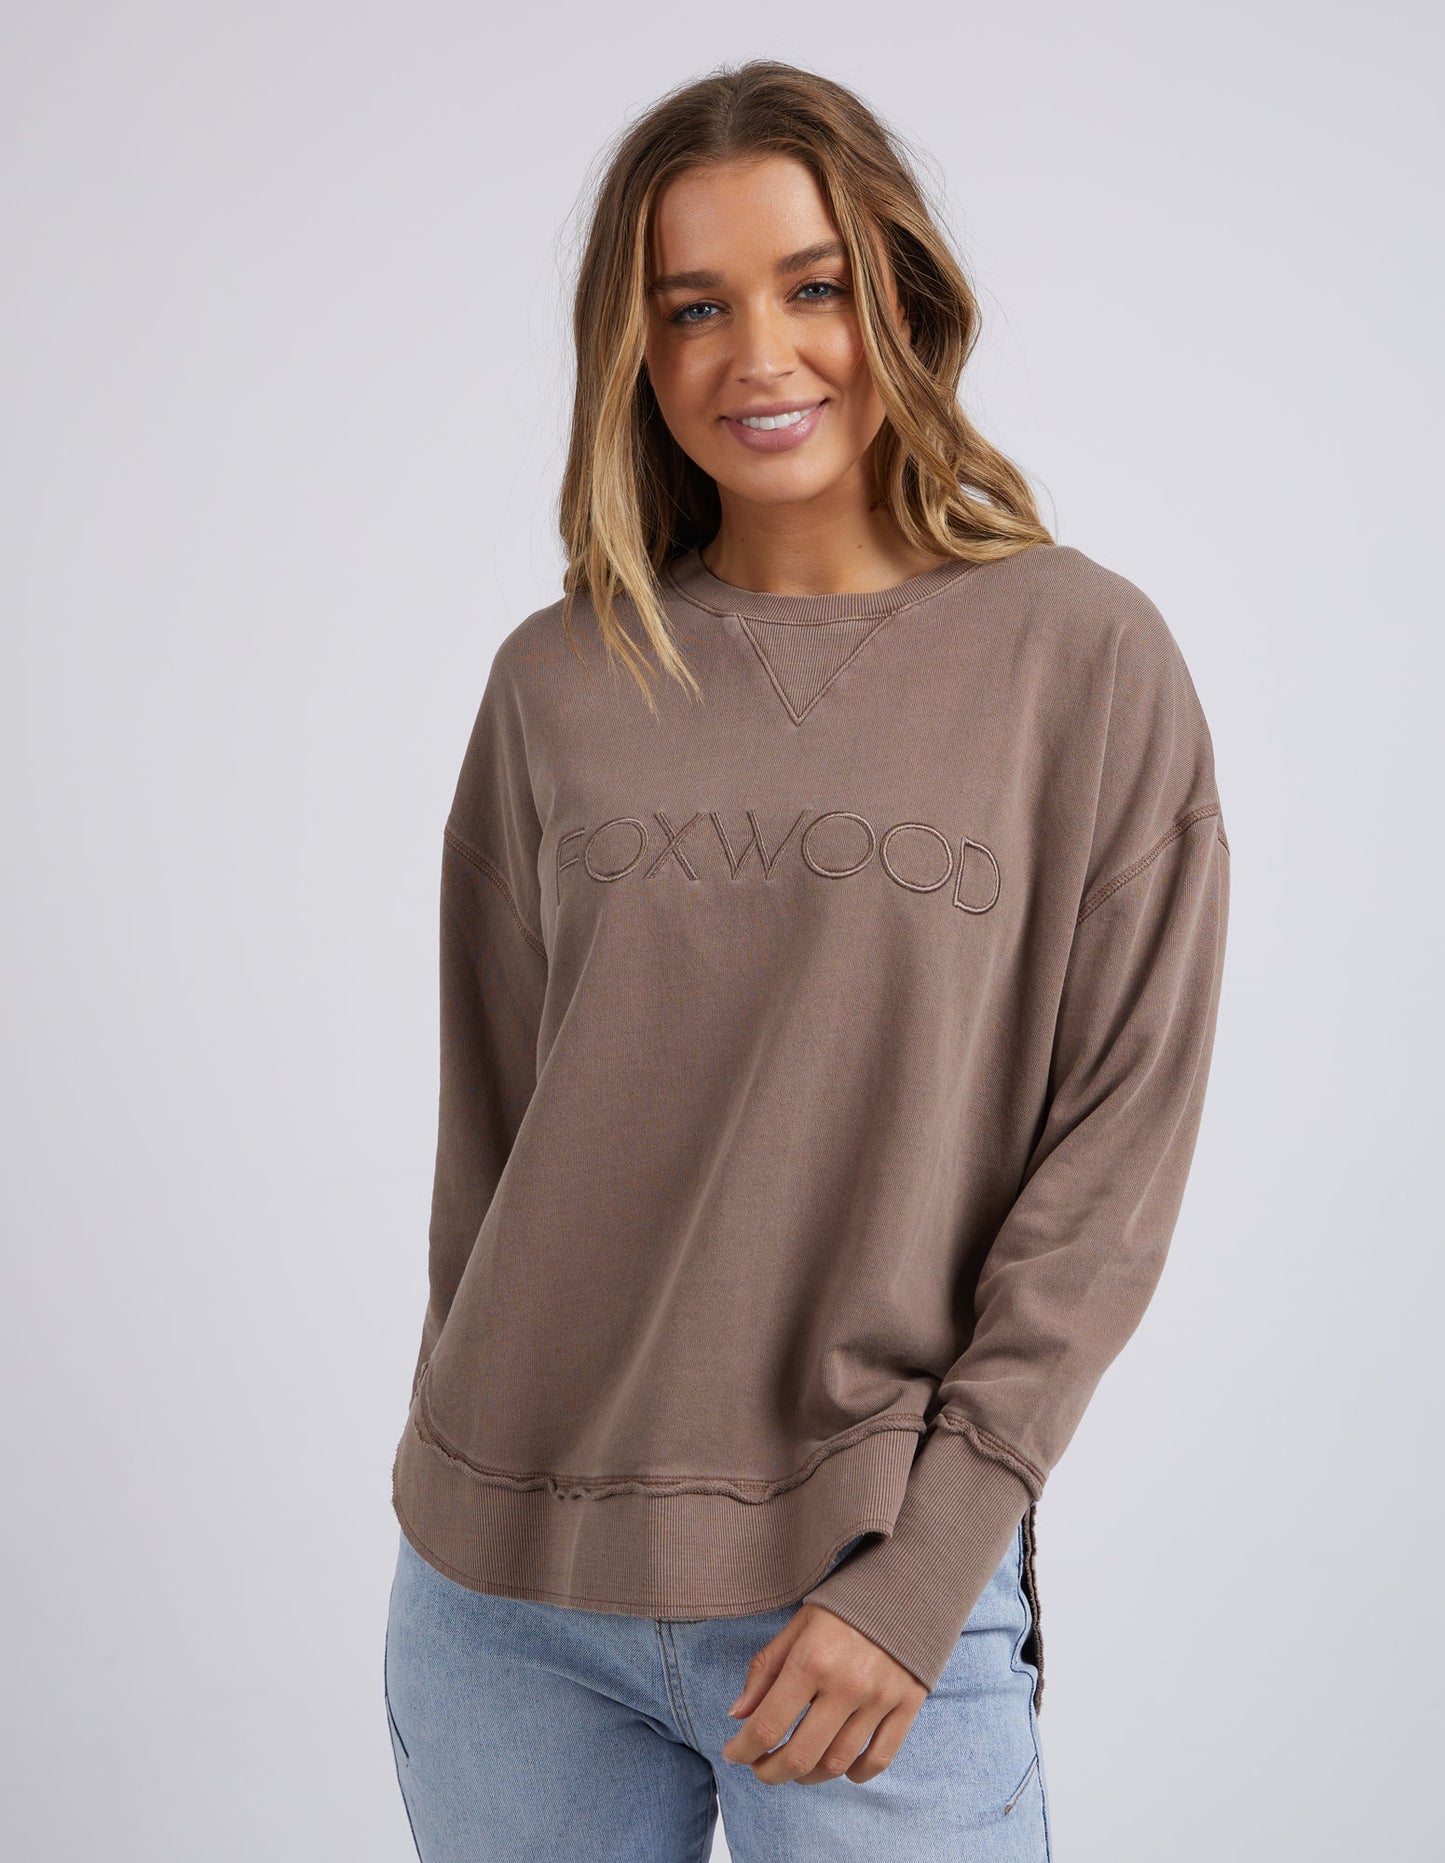 Foxwood Simplified Crew - Chocolate Brown